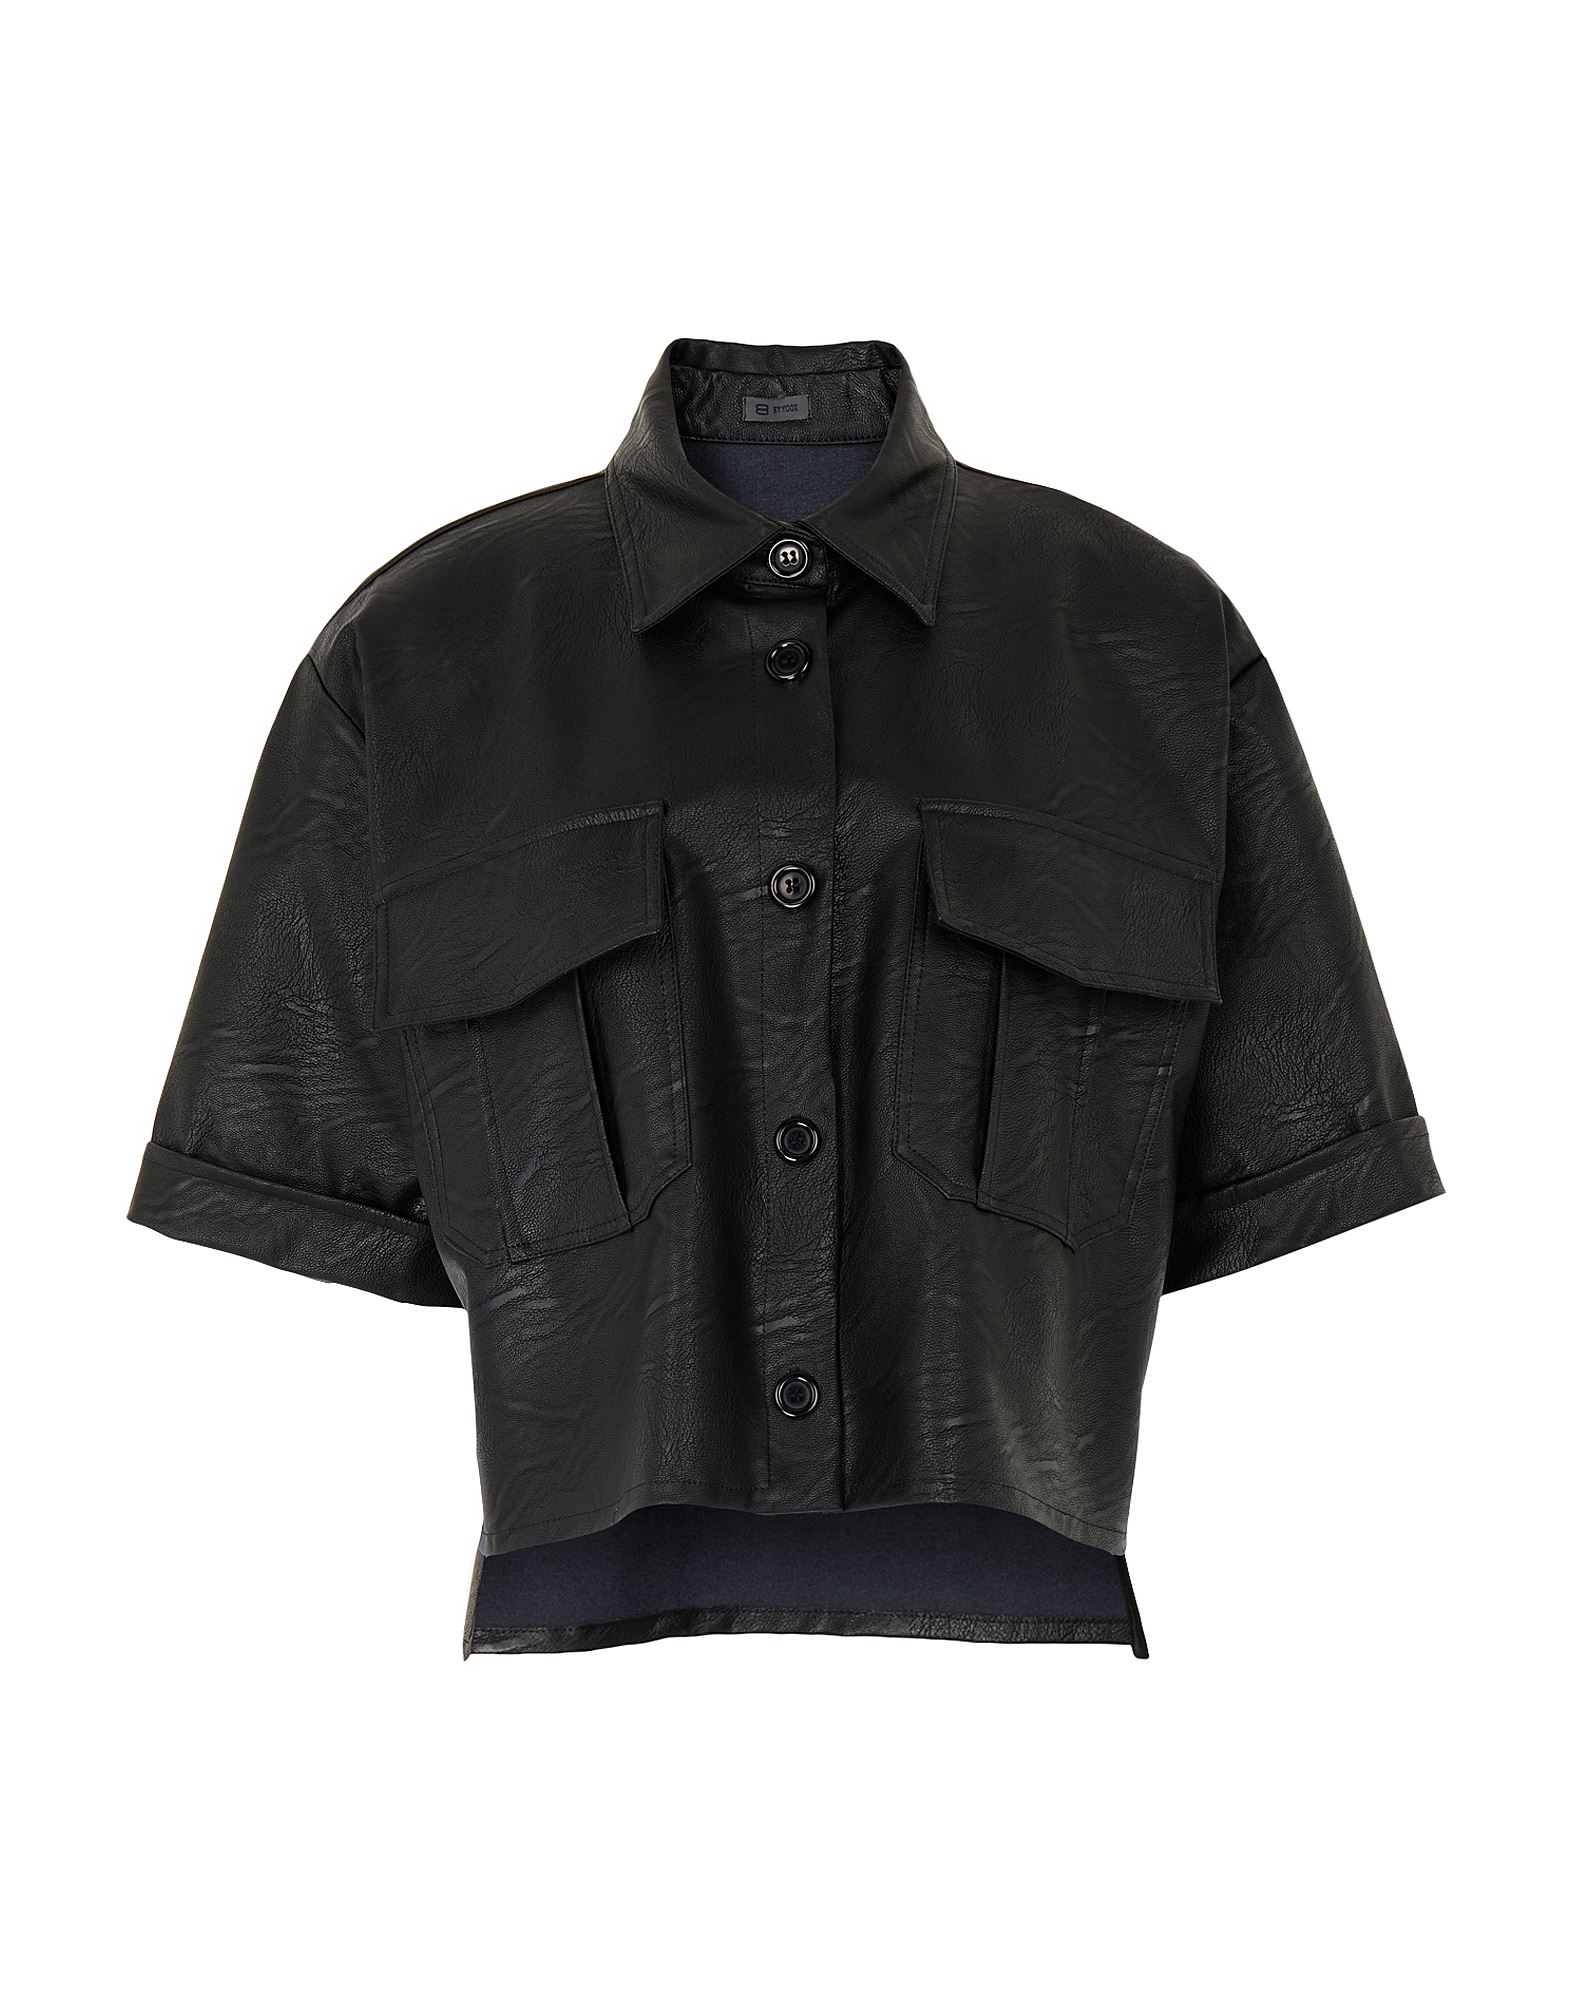 ＜YOOX＞ ★50%OFF！8 by YOOX レディース シャツ ブラック 38 ポリウレタン 100% BUTTONED S/SLEEVE SHIRT W/ FRONT POCKETS